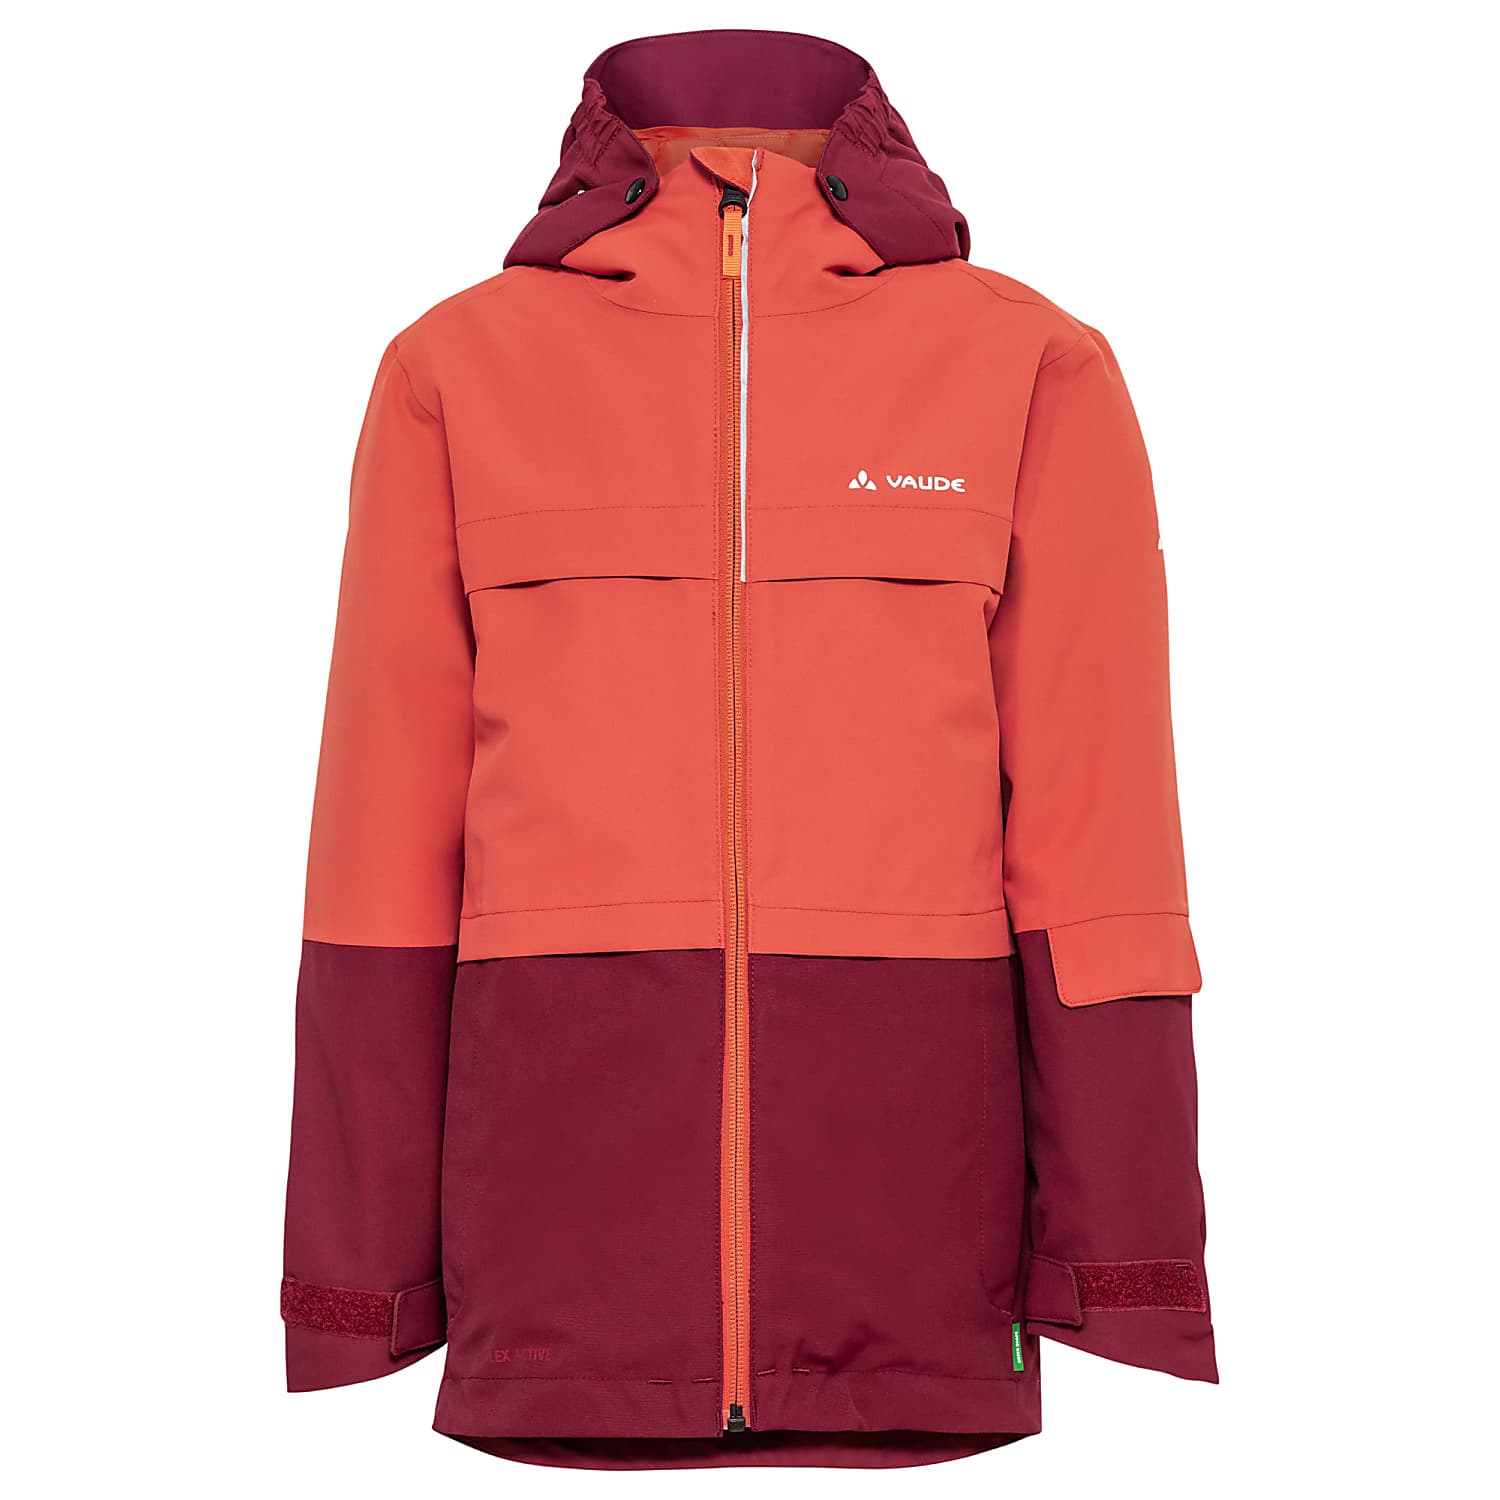 Vaude KIDS SNOW CUP 3IN1 JACKET II, Hot Chili - Free Shipping starts at 60£